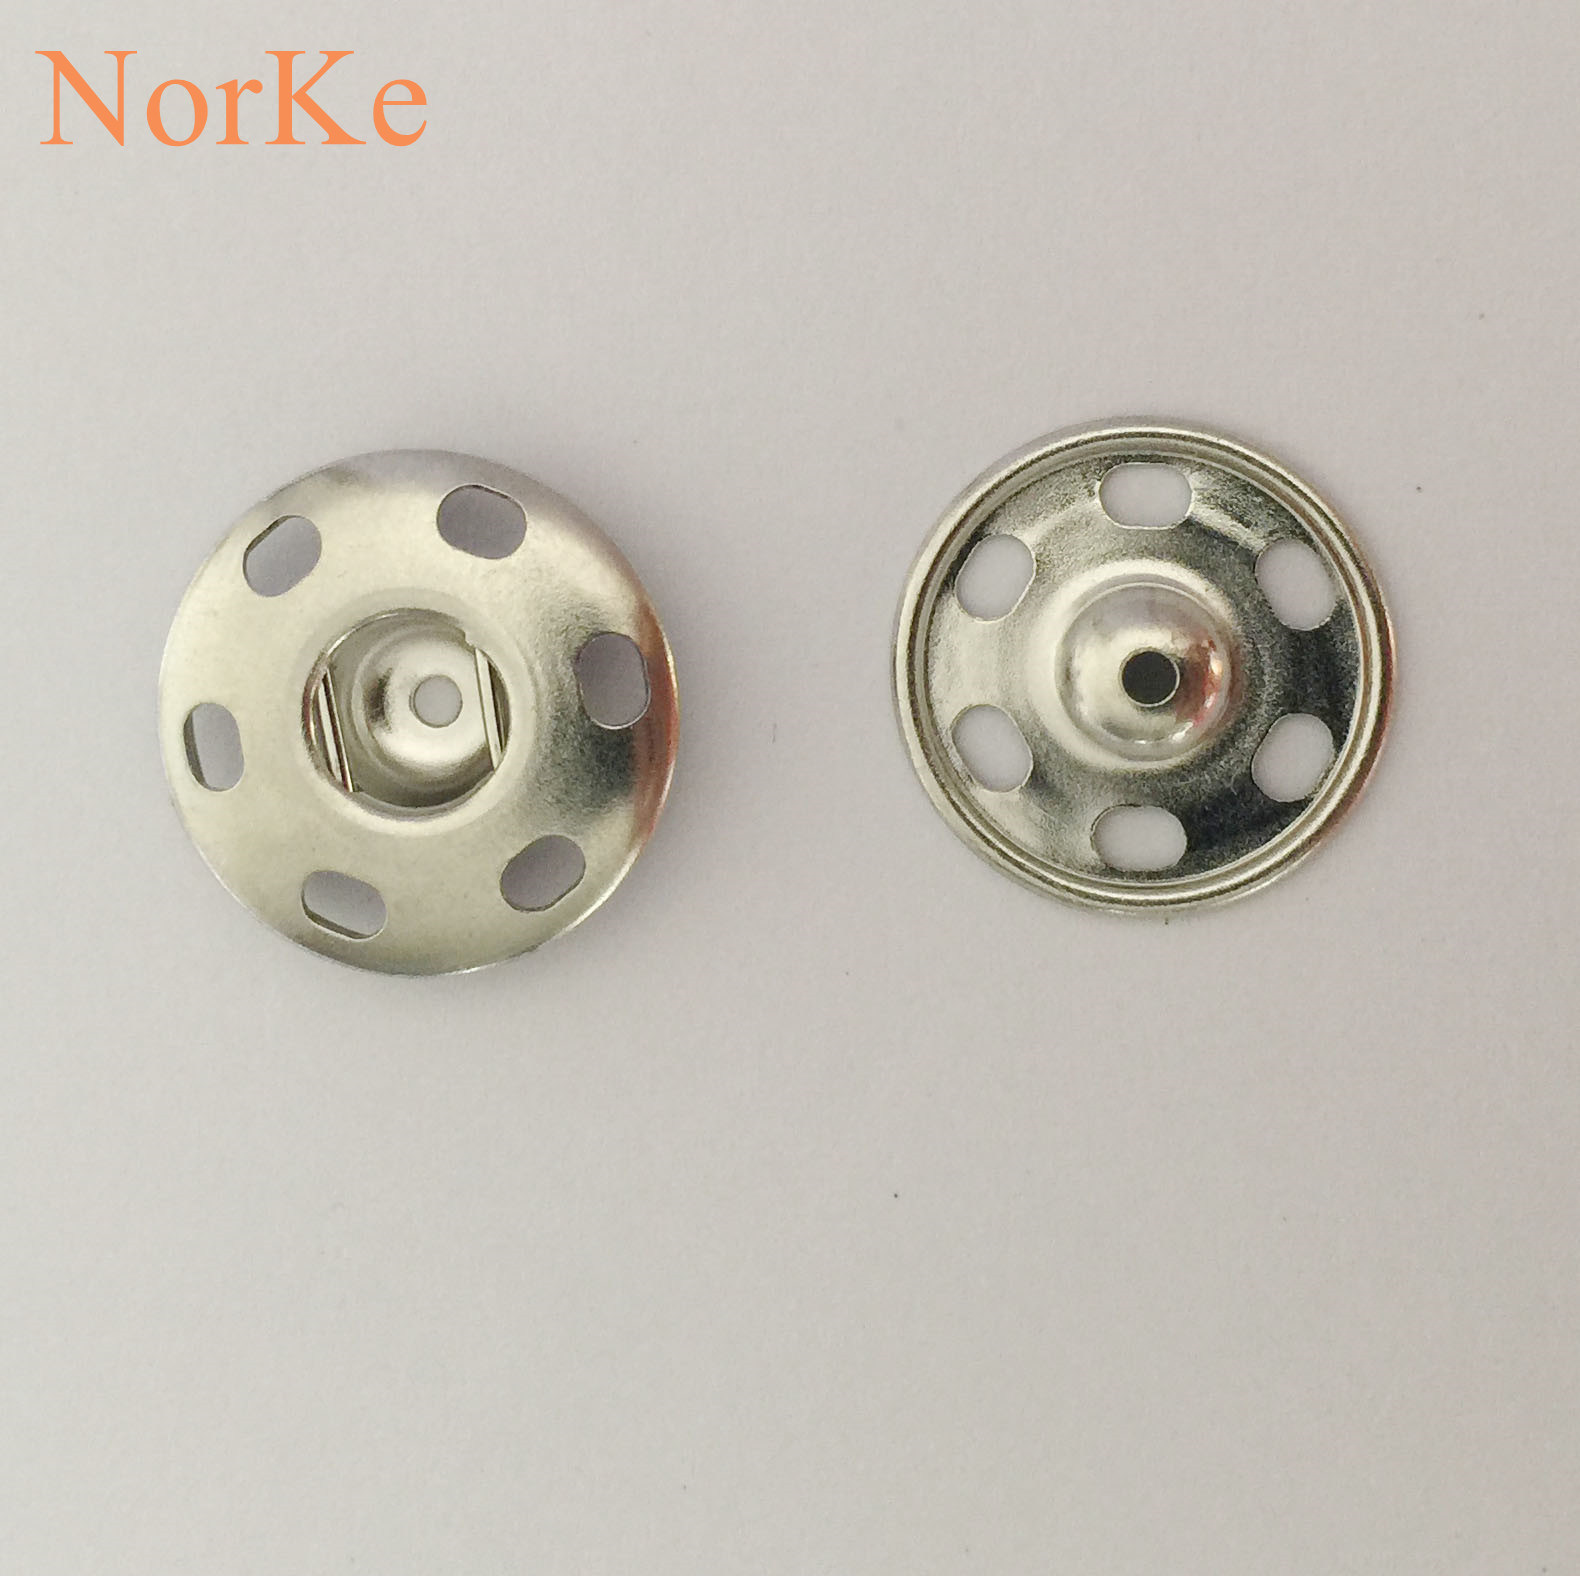 Metal 2 Parts Sewing Press Snap Button